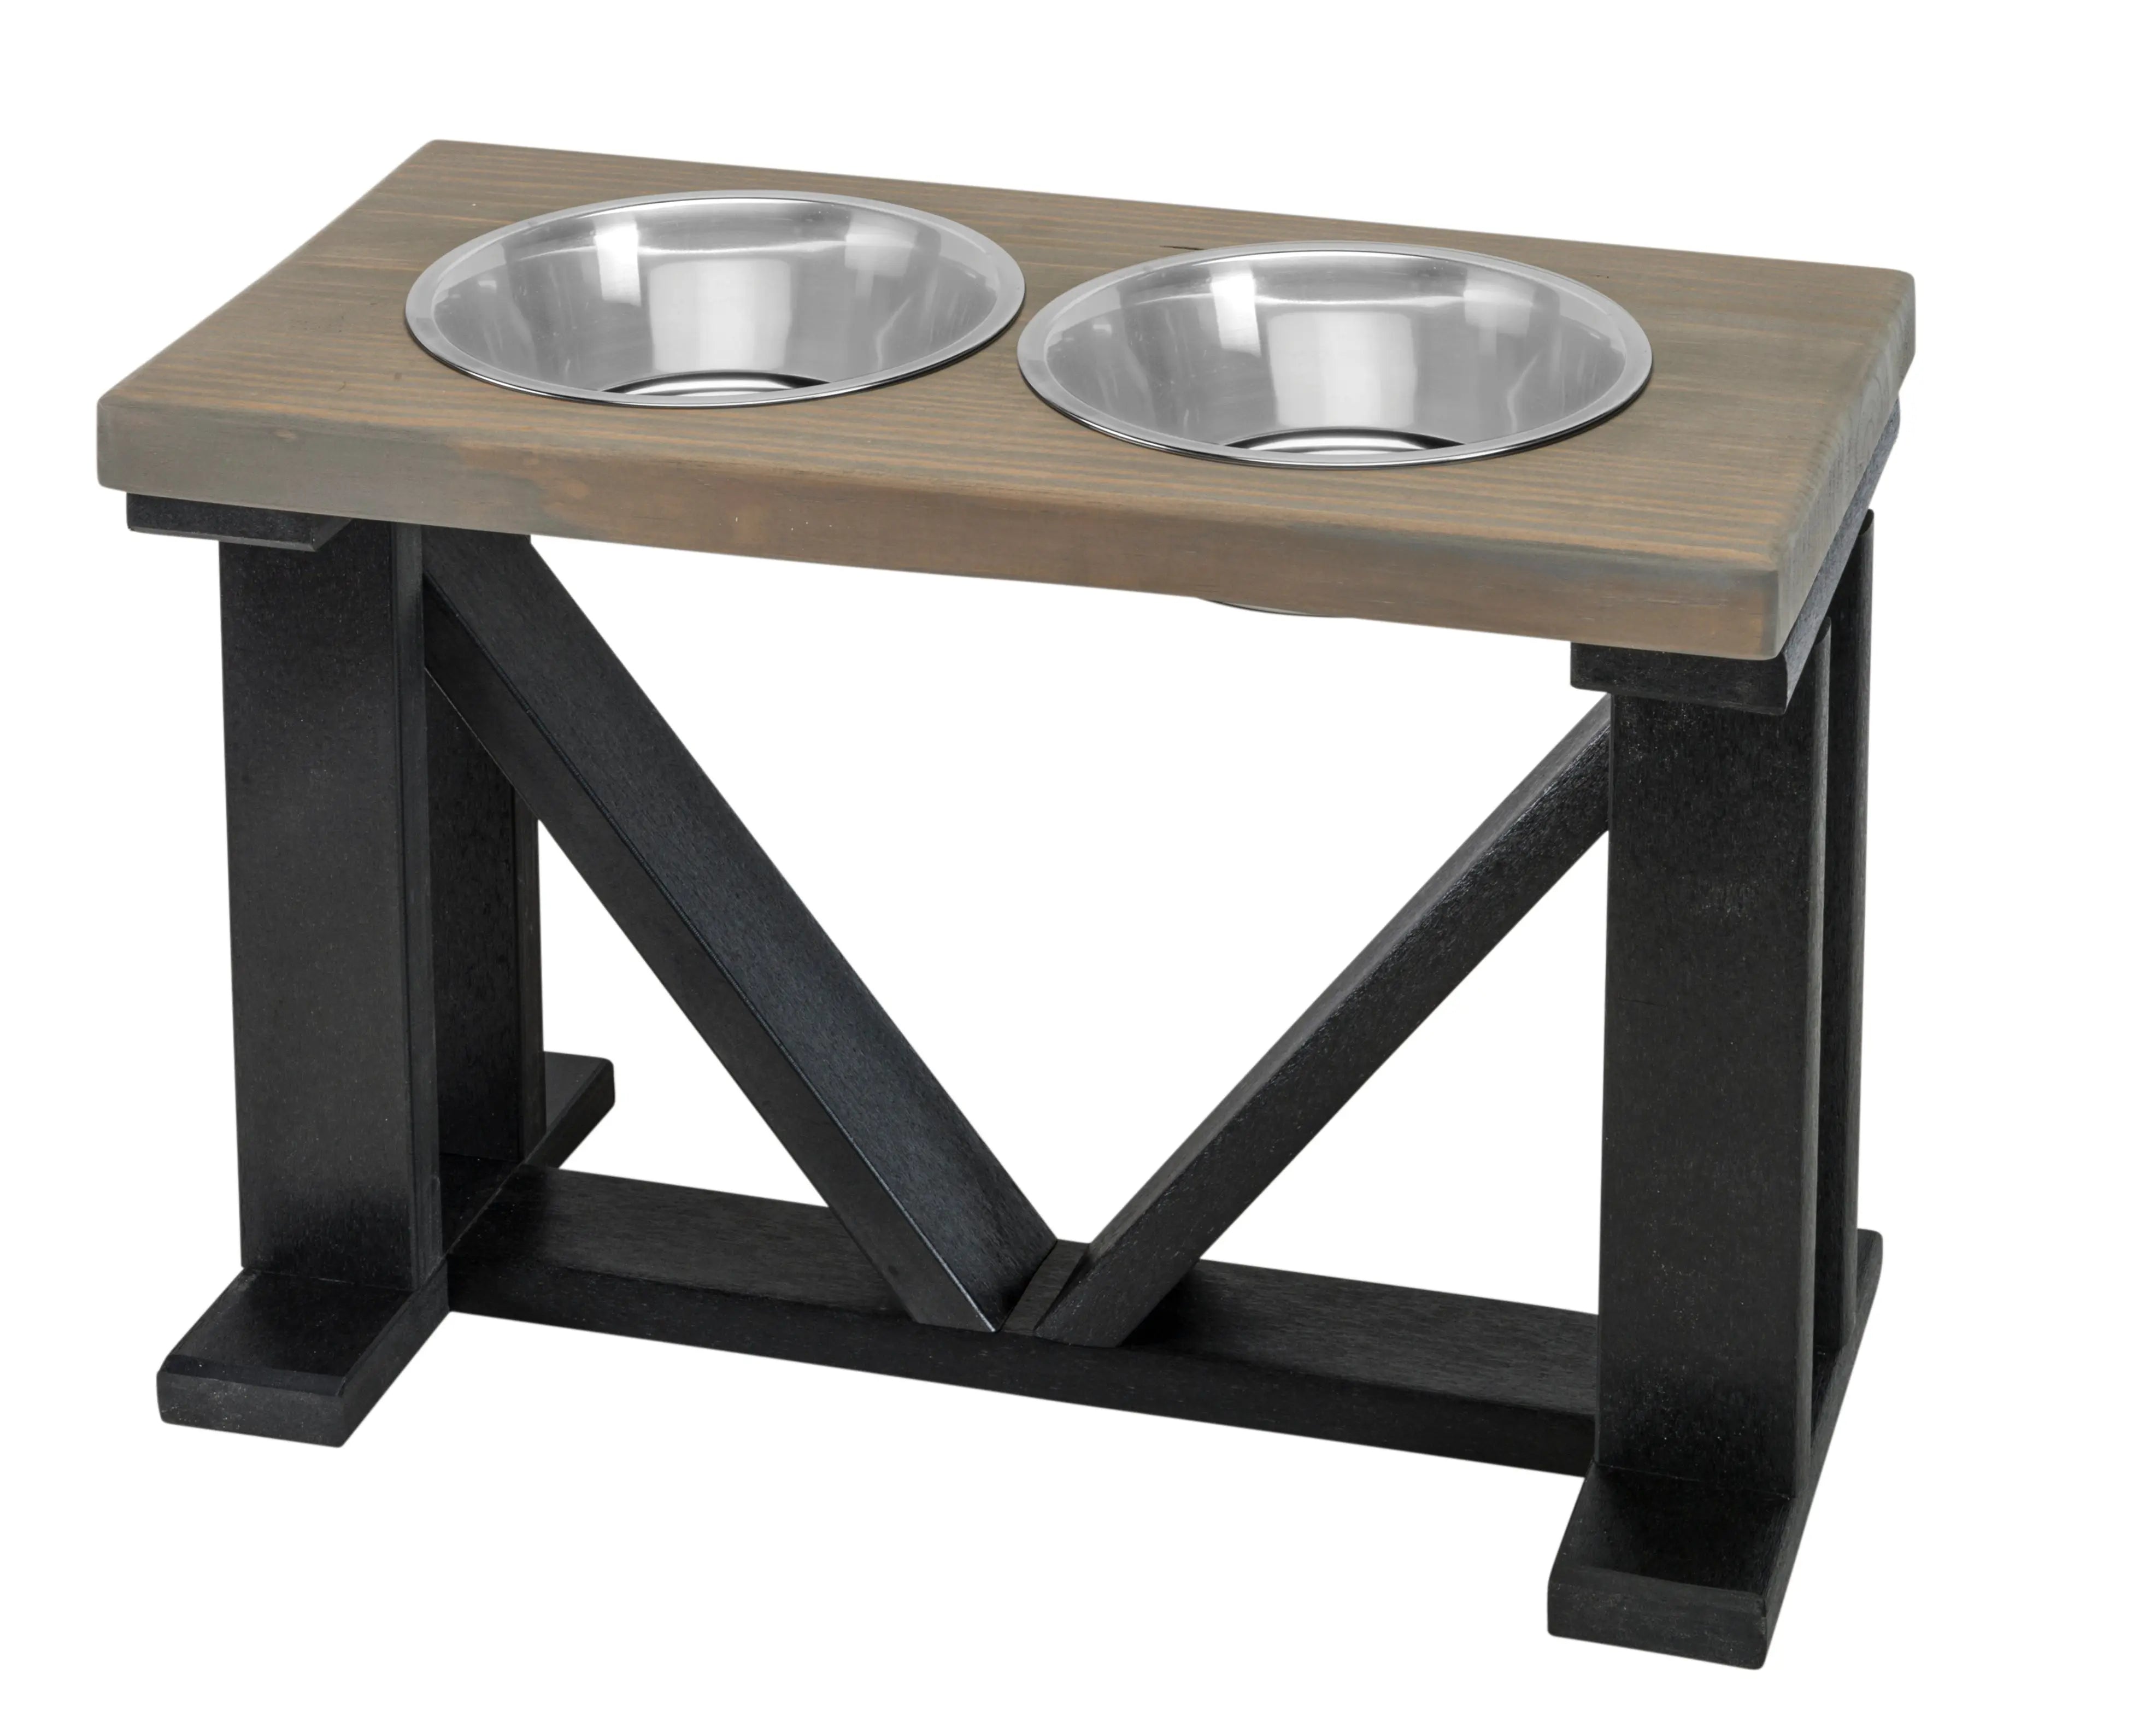 STAINLESS STEEL ADJUSTABLE HEIGHT PET STAND + 2 BOWLS DOG FEEDING STATION  LARGE